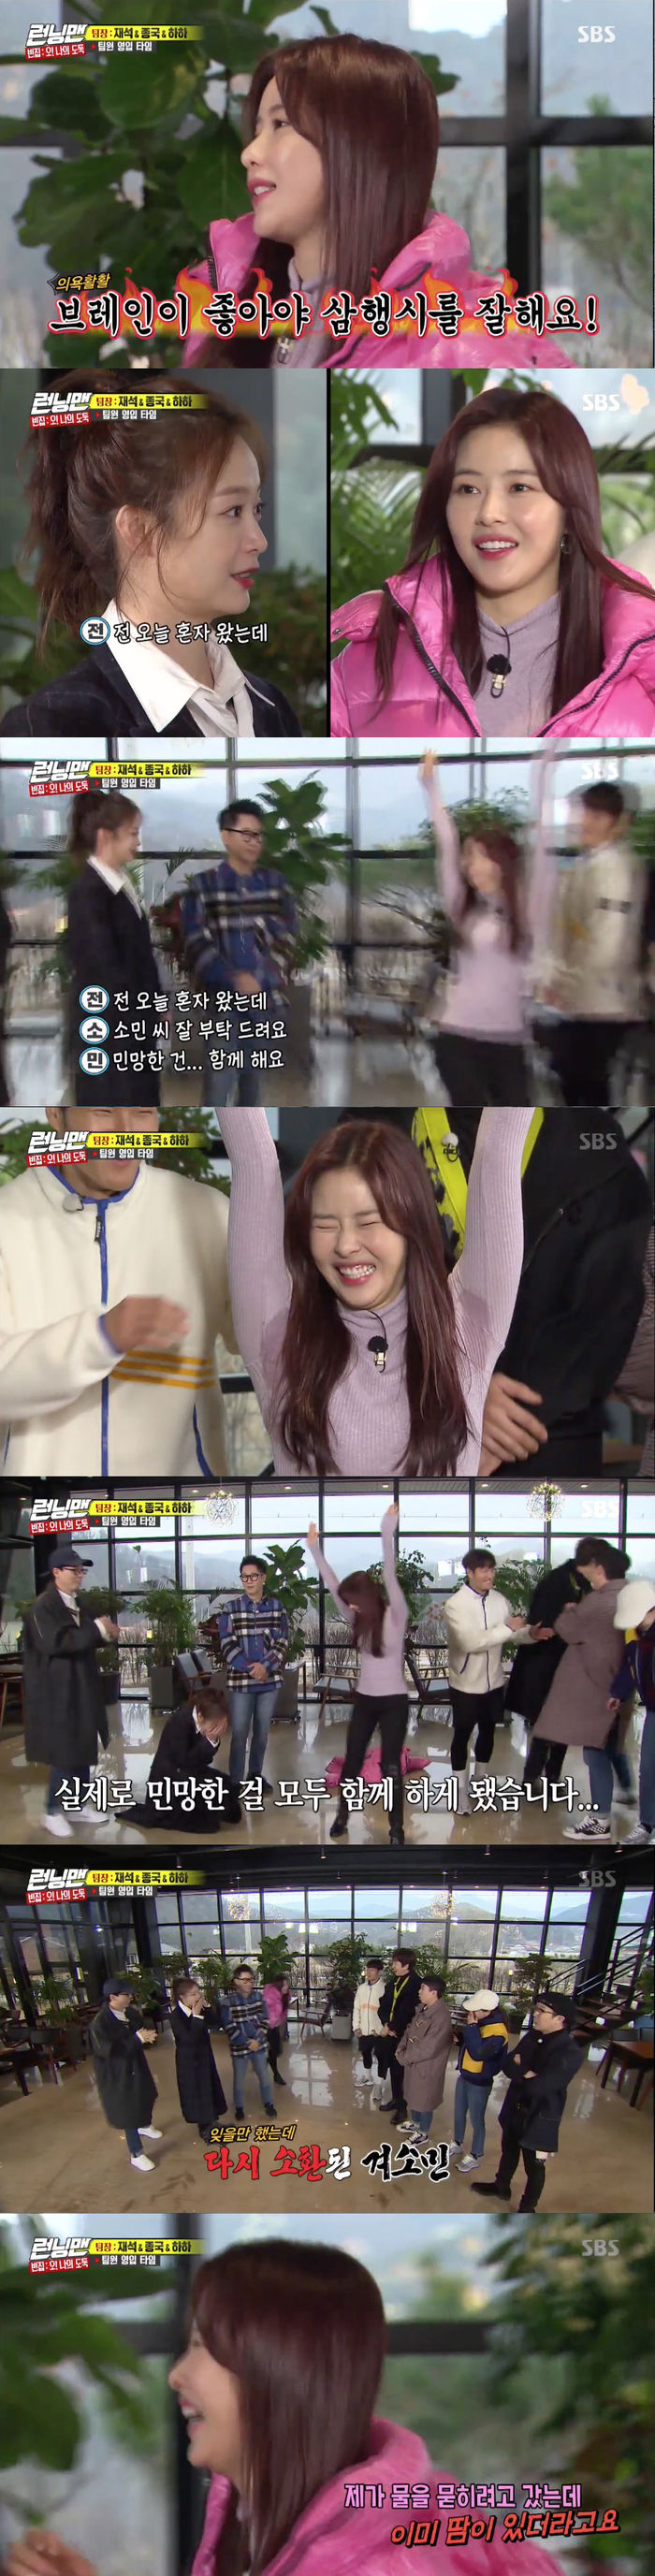 Park Ha-na showed off her sense of entertainment, which she feared was broken.On SBS Running Man broadcast on the 2nd, Empty House: Oh! My Thief Race was held.Park Ha-na, who appeared as a guest on the show, attracted attention by showing his extraordinary personal period.And the members appealed themselves in various ways to see the team leaders Yoo Jae-Suk, Kim Jong Kook and Haha, who were arbitrarily set by the production team.At this point, Park Ha-na said, I am good at triangular poetry; I should like Brain to do triangular poetry. Then he rushed to the bathroom, shouting Wait a minute.Park Ha-na, who reappeared soon, said, I prepared a three-way city in the name of Running Man members, but I will show you a powerful room because I do not have time.Park Ha-na said, I came alone today, but I would like to ask Mr. Somin, I am with you.The members said, I did not make this in the bathroom with the shower on. What do you do?Park Ha-na then released TMI, saying, I actually went to get water and I already had sweat.